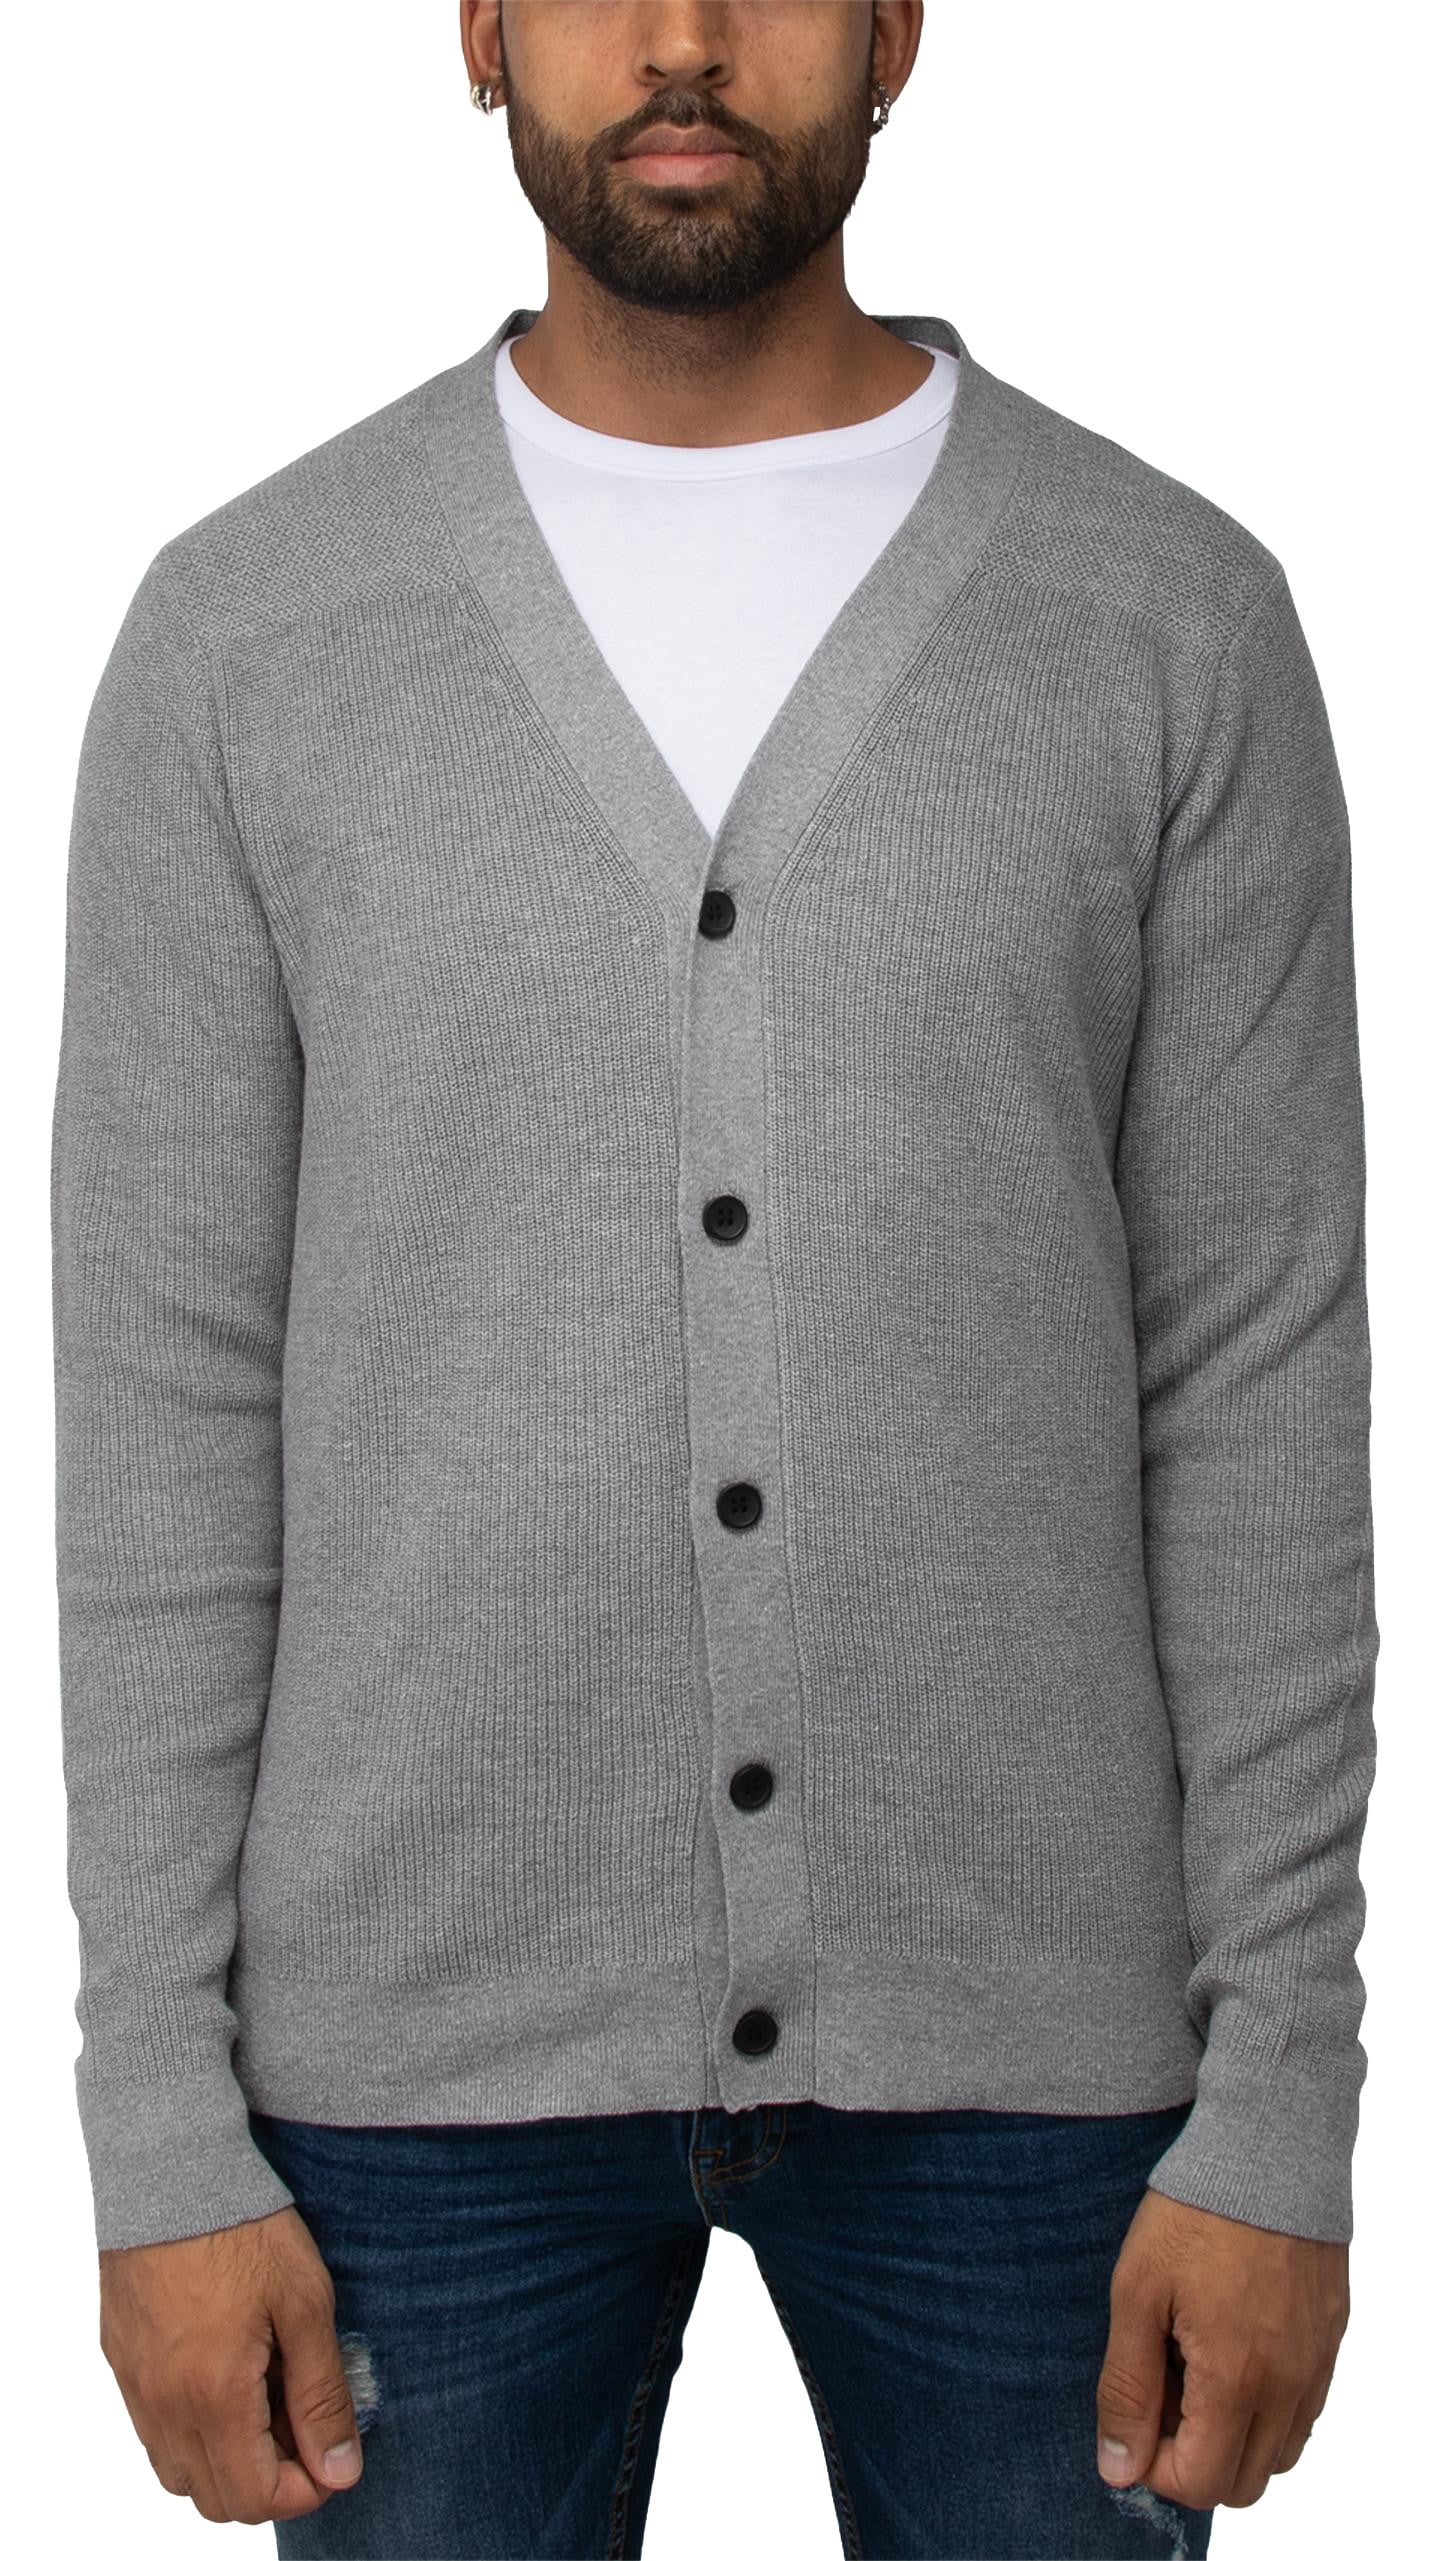 X RAY Men's Cotton Cardigan Sweater, Long Sleeve Slim V-Neck Soft Button  Down Cardigan, Ribbed Cotton V-neck Grey, 5X-Large 